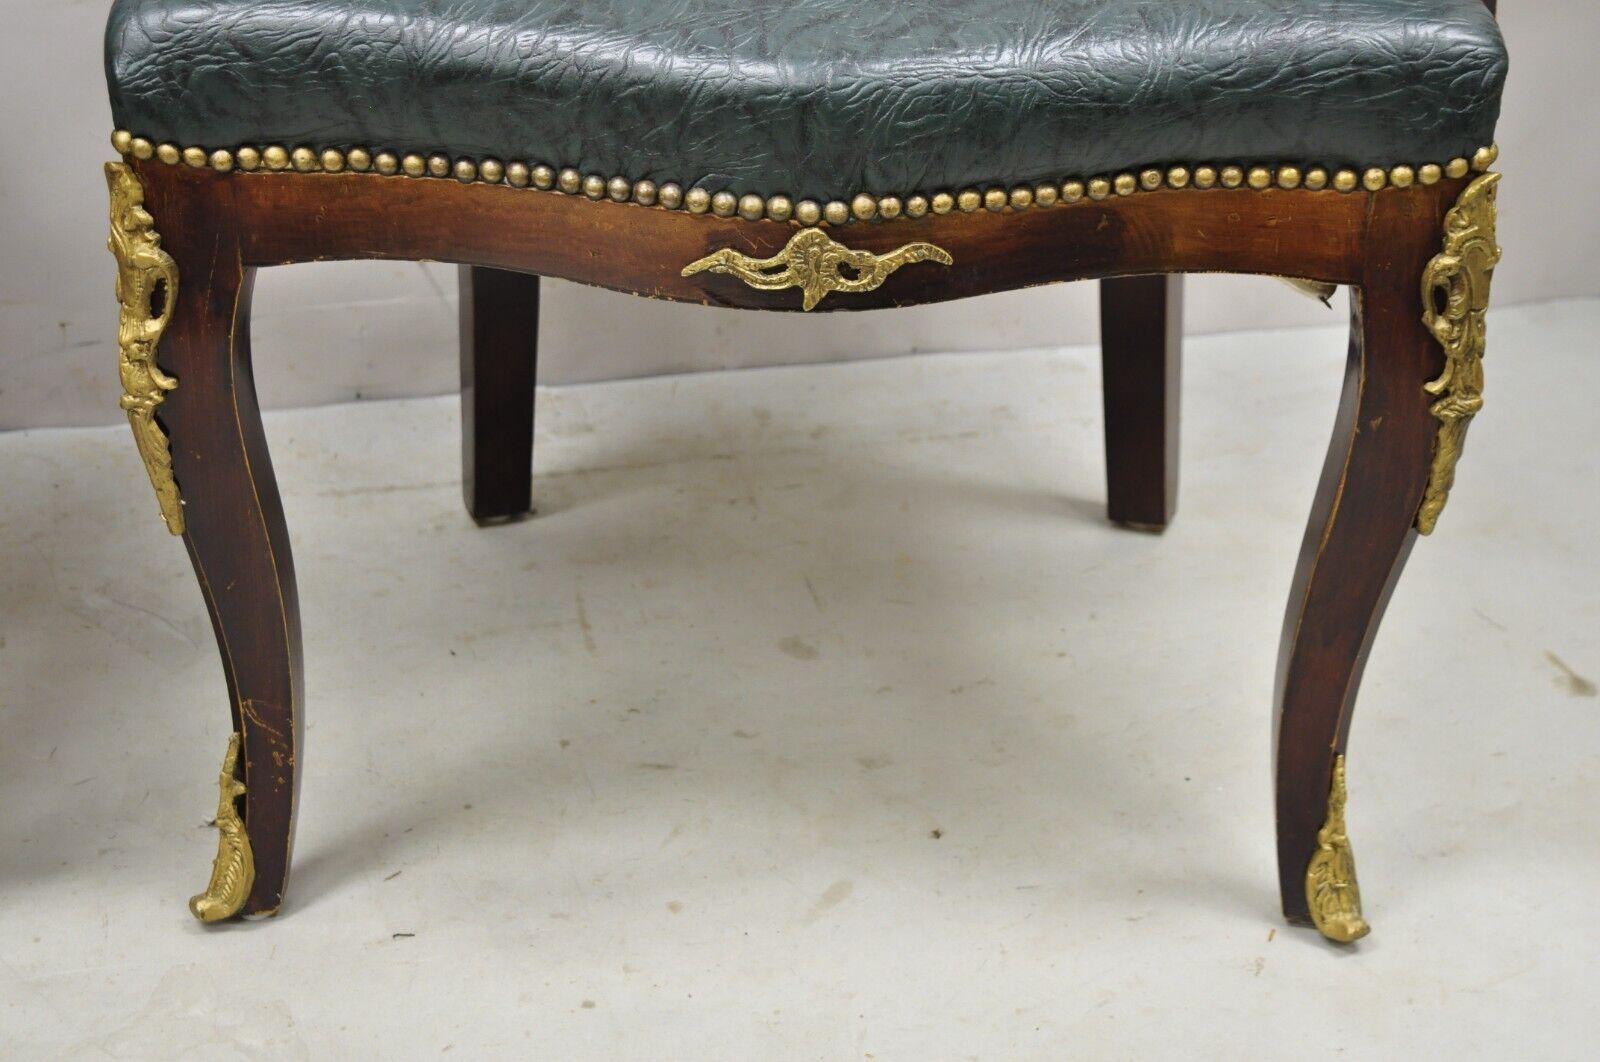 Vintage French Louis XV Style Solid Wood Bronze Ormolu Arm Chairs - a Pair For Sale 1